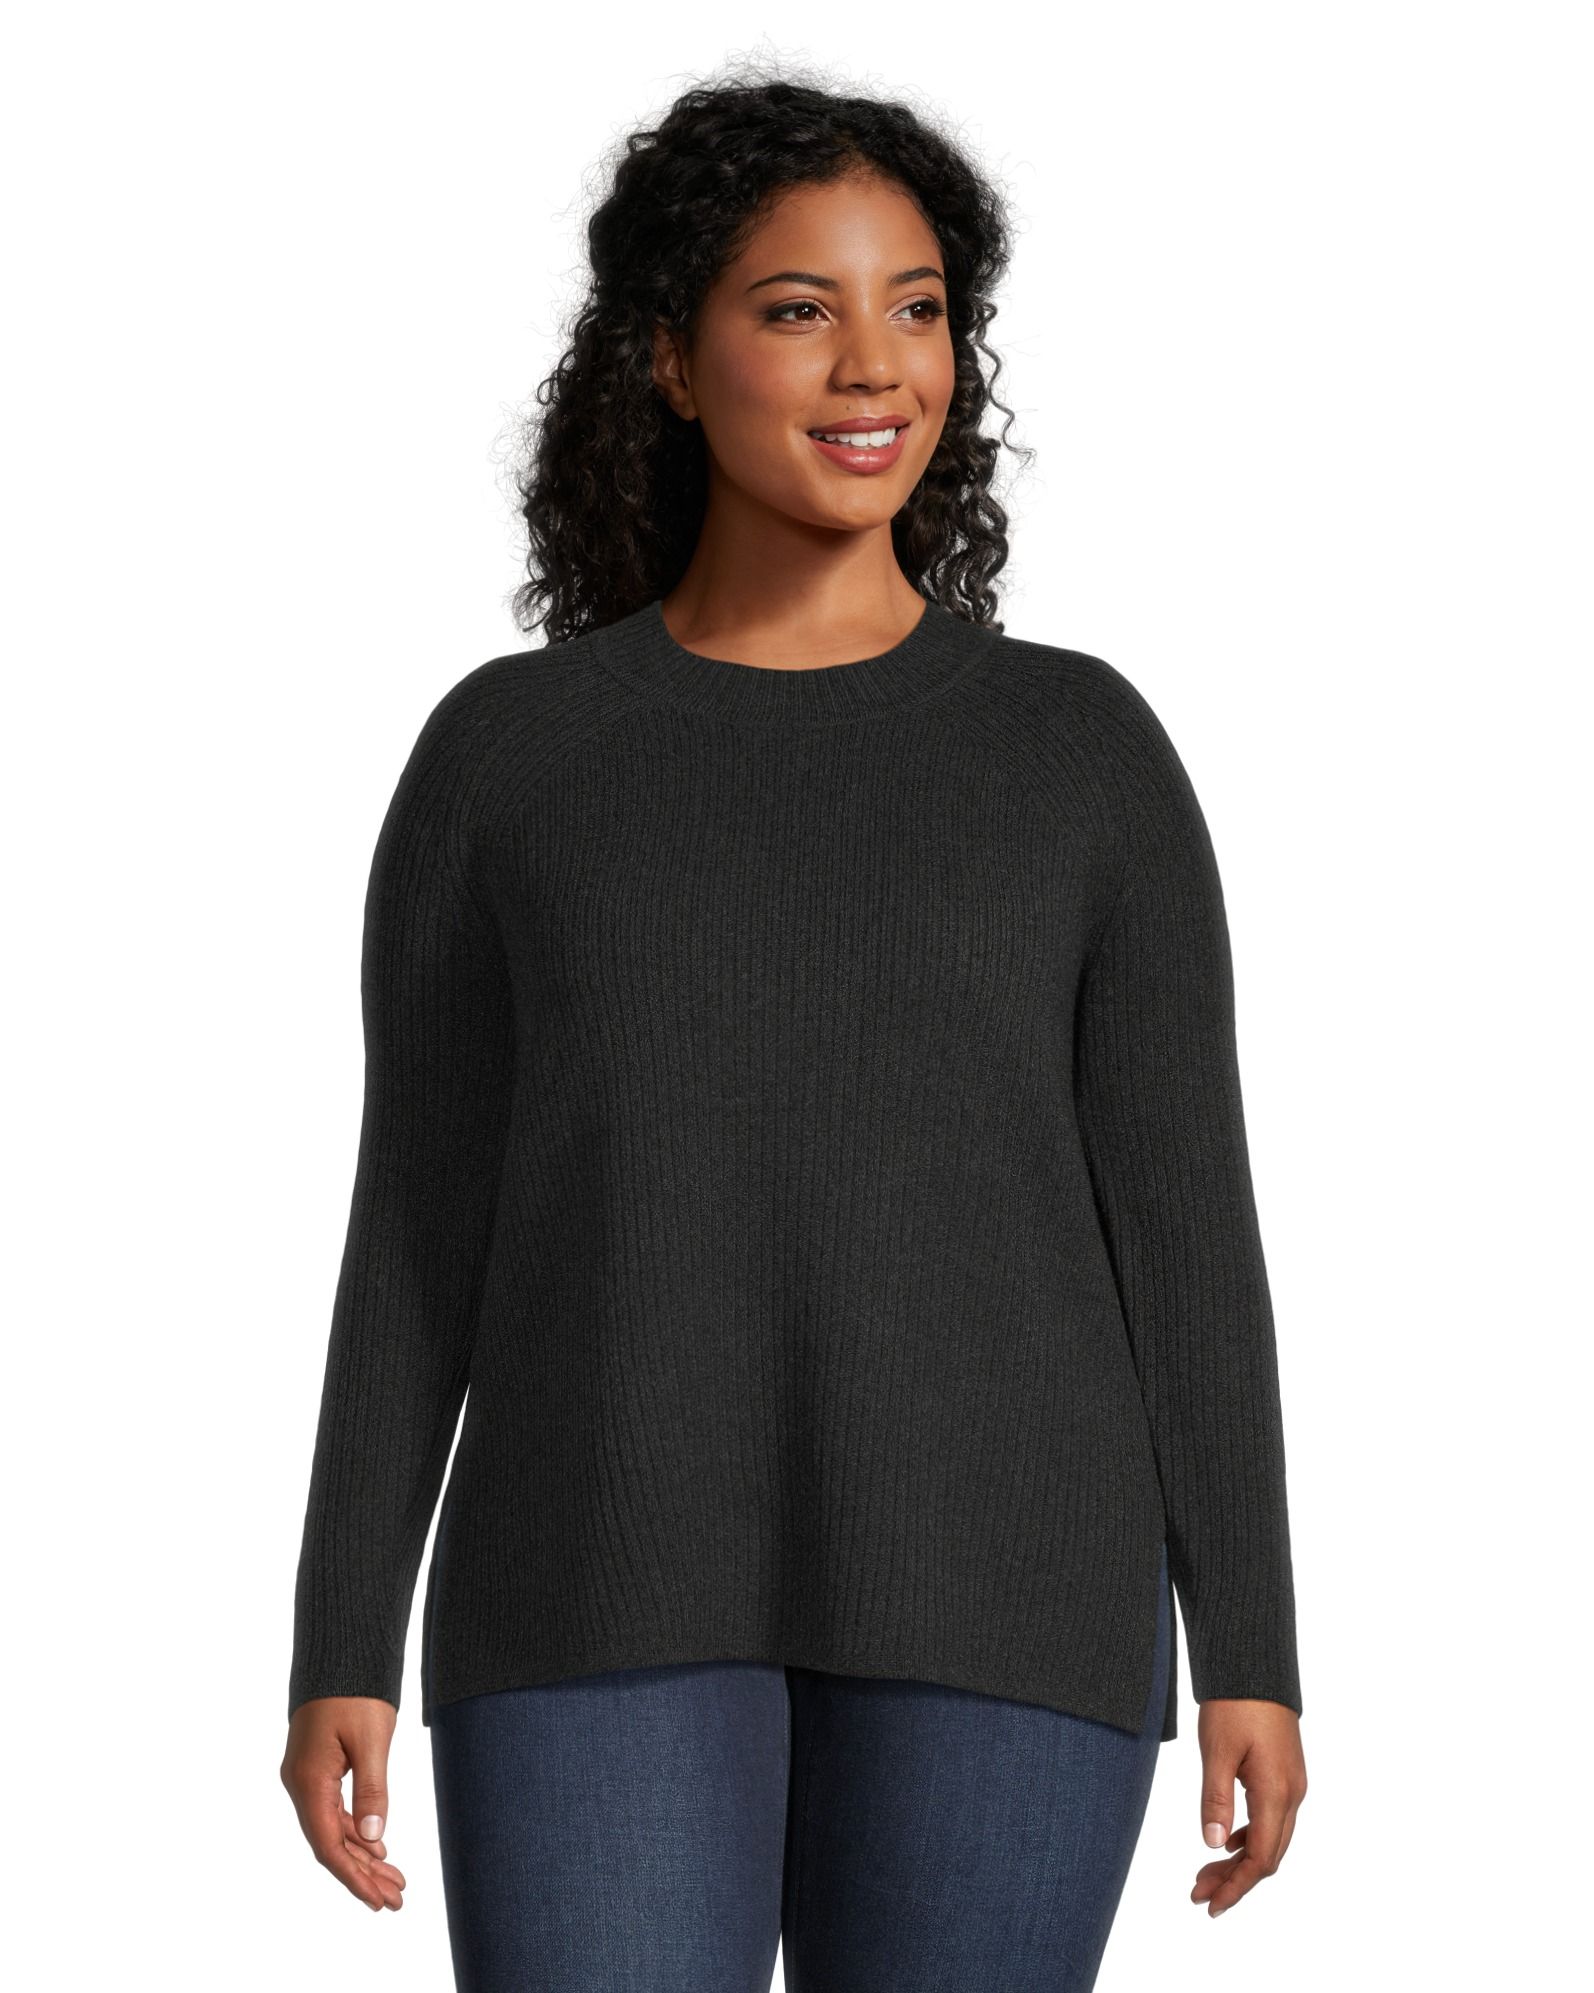 Long-Sleeve Crew-Neck Semi-Fitted Sweater, Regular